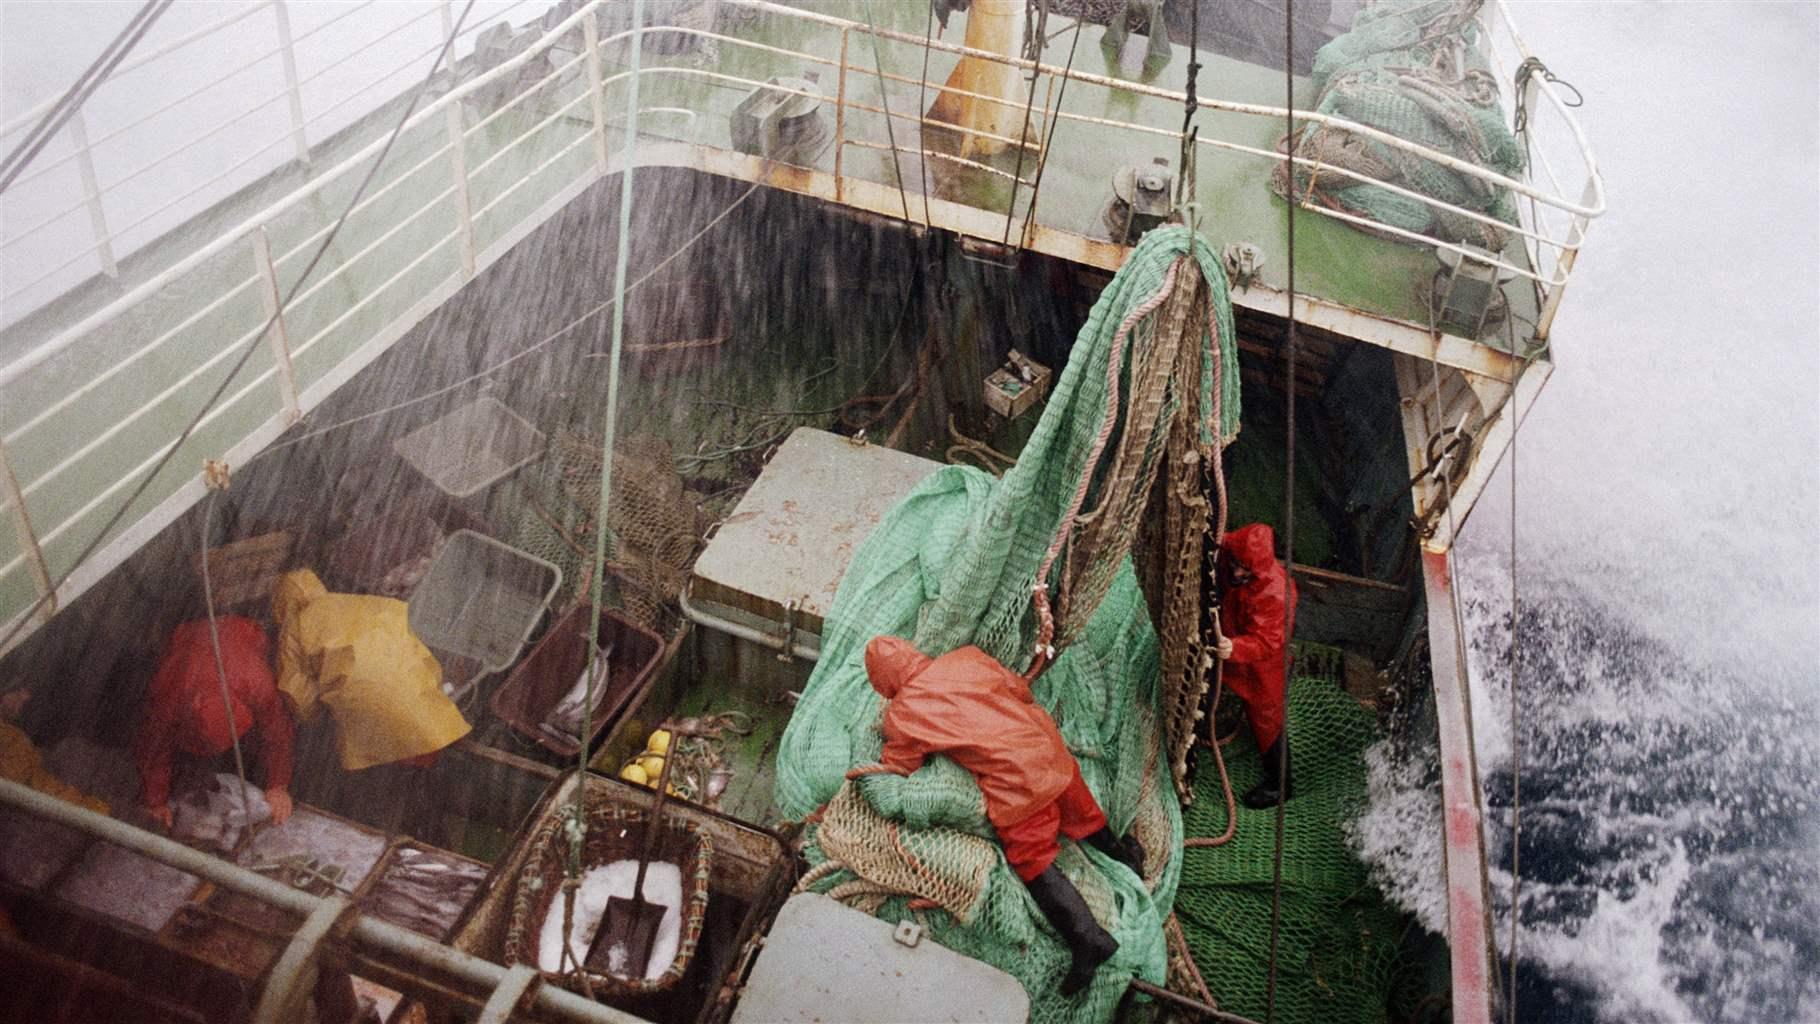 Rain pours down on a fishing vessel at sea, while waves splash the deck. Fishers in orange and red rain jackets work to secure buckets and green fishing nets.